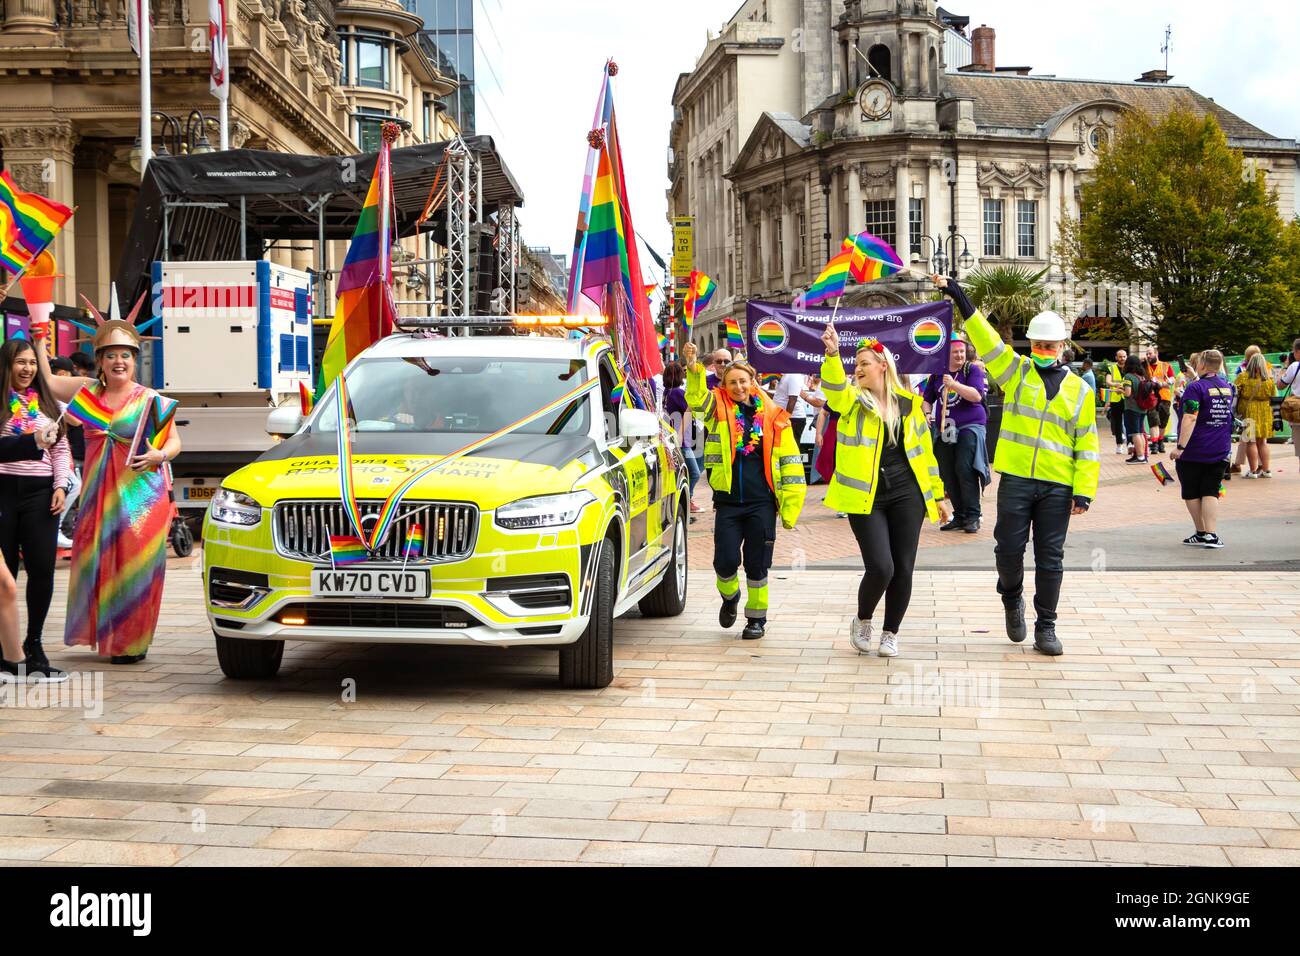 highways England volvo car and staff waving rainbow flags and wearing fluorescent clothing at Birmingham Pride Saturday 25th September 2021 Stock Photo